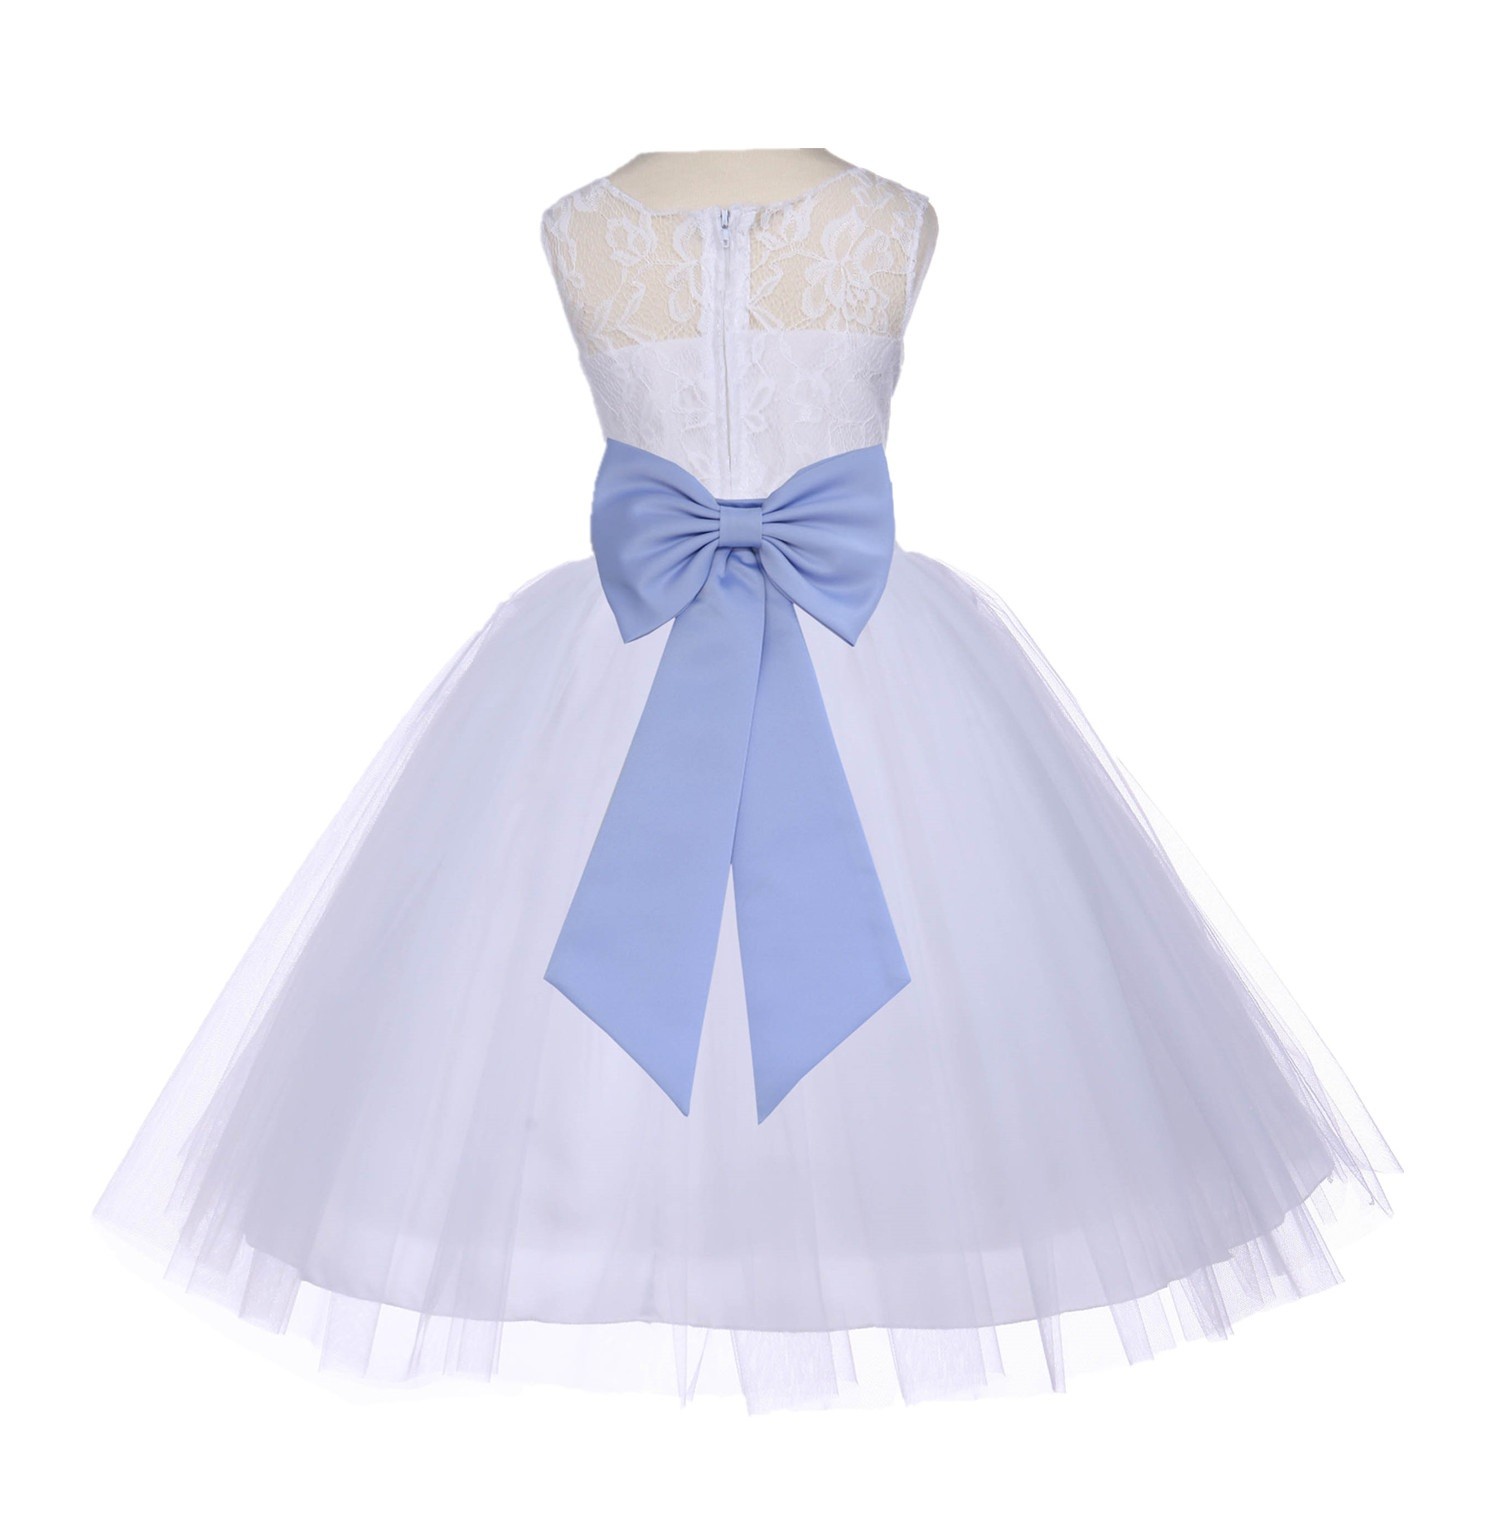 White/Bluebird Floral Lace Bodice Tulle Flower Girl Dress Wedding 153T